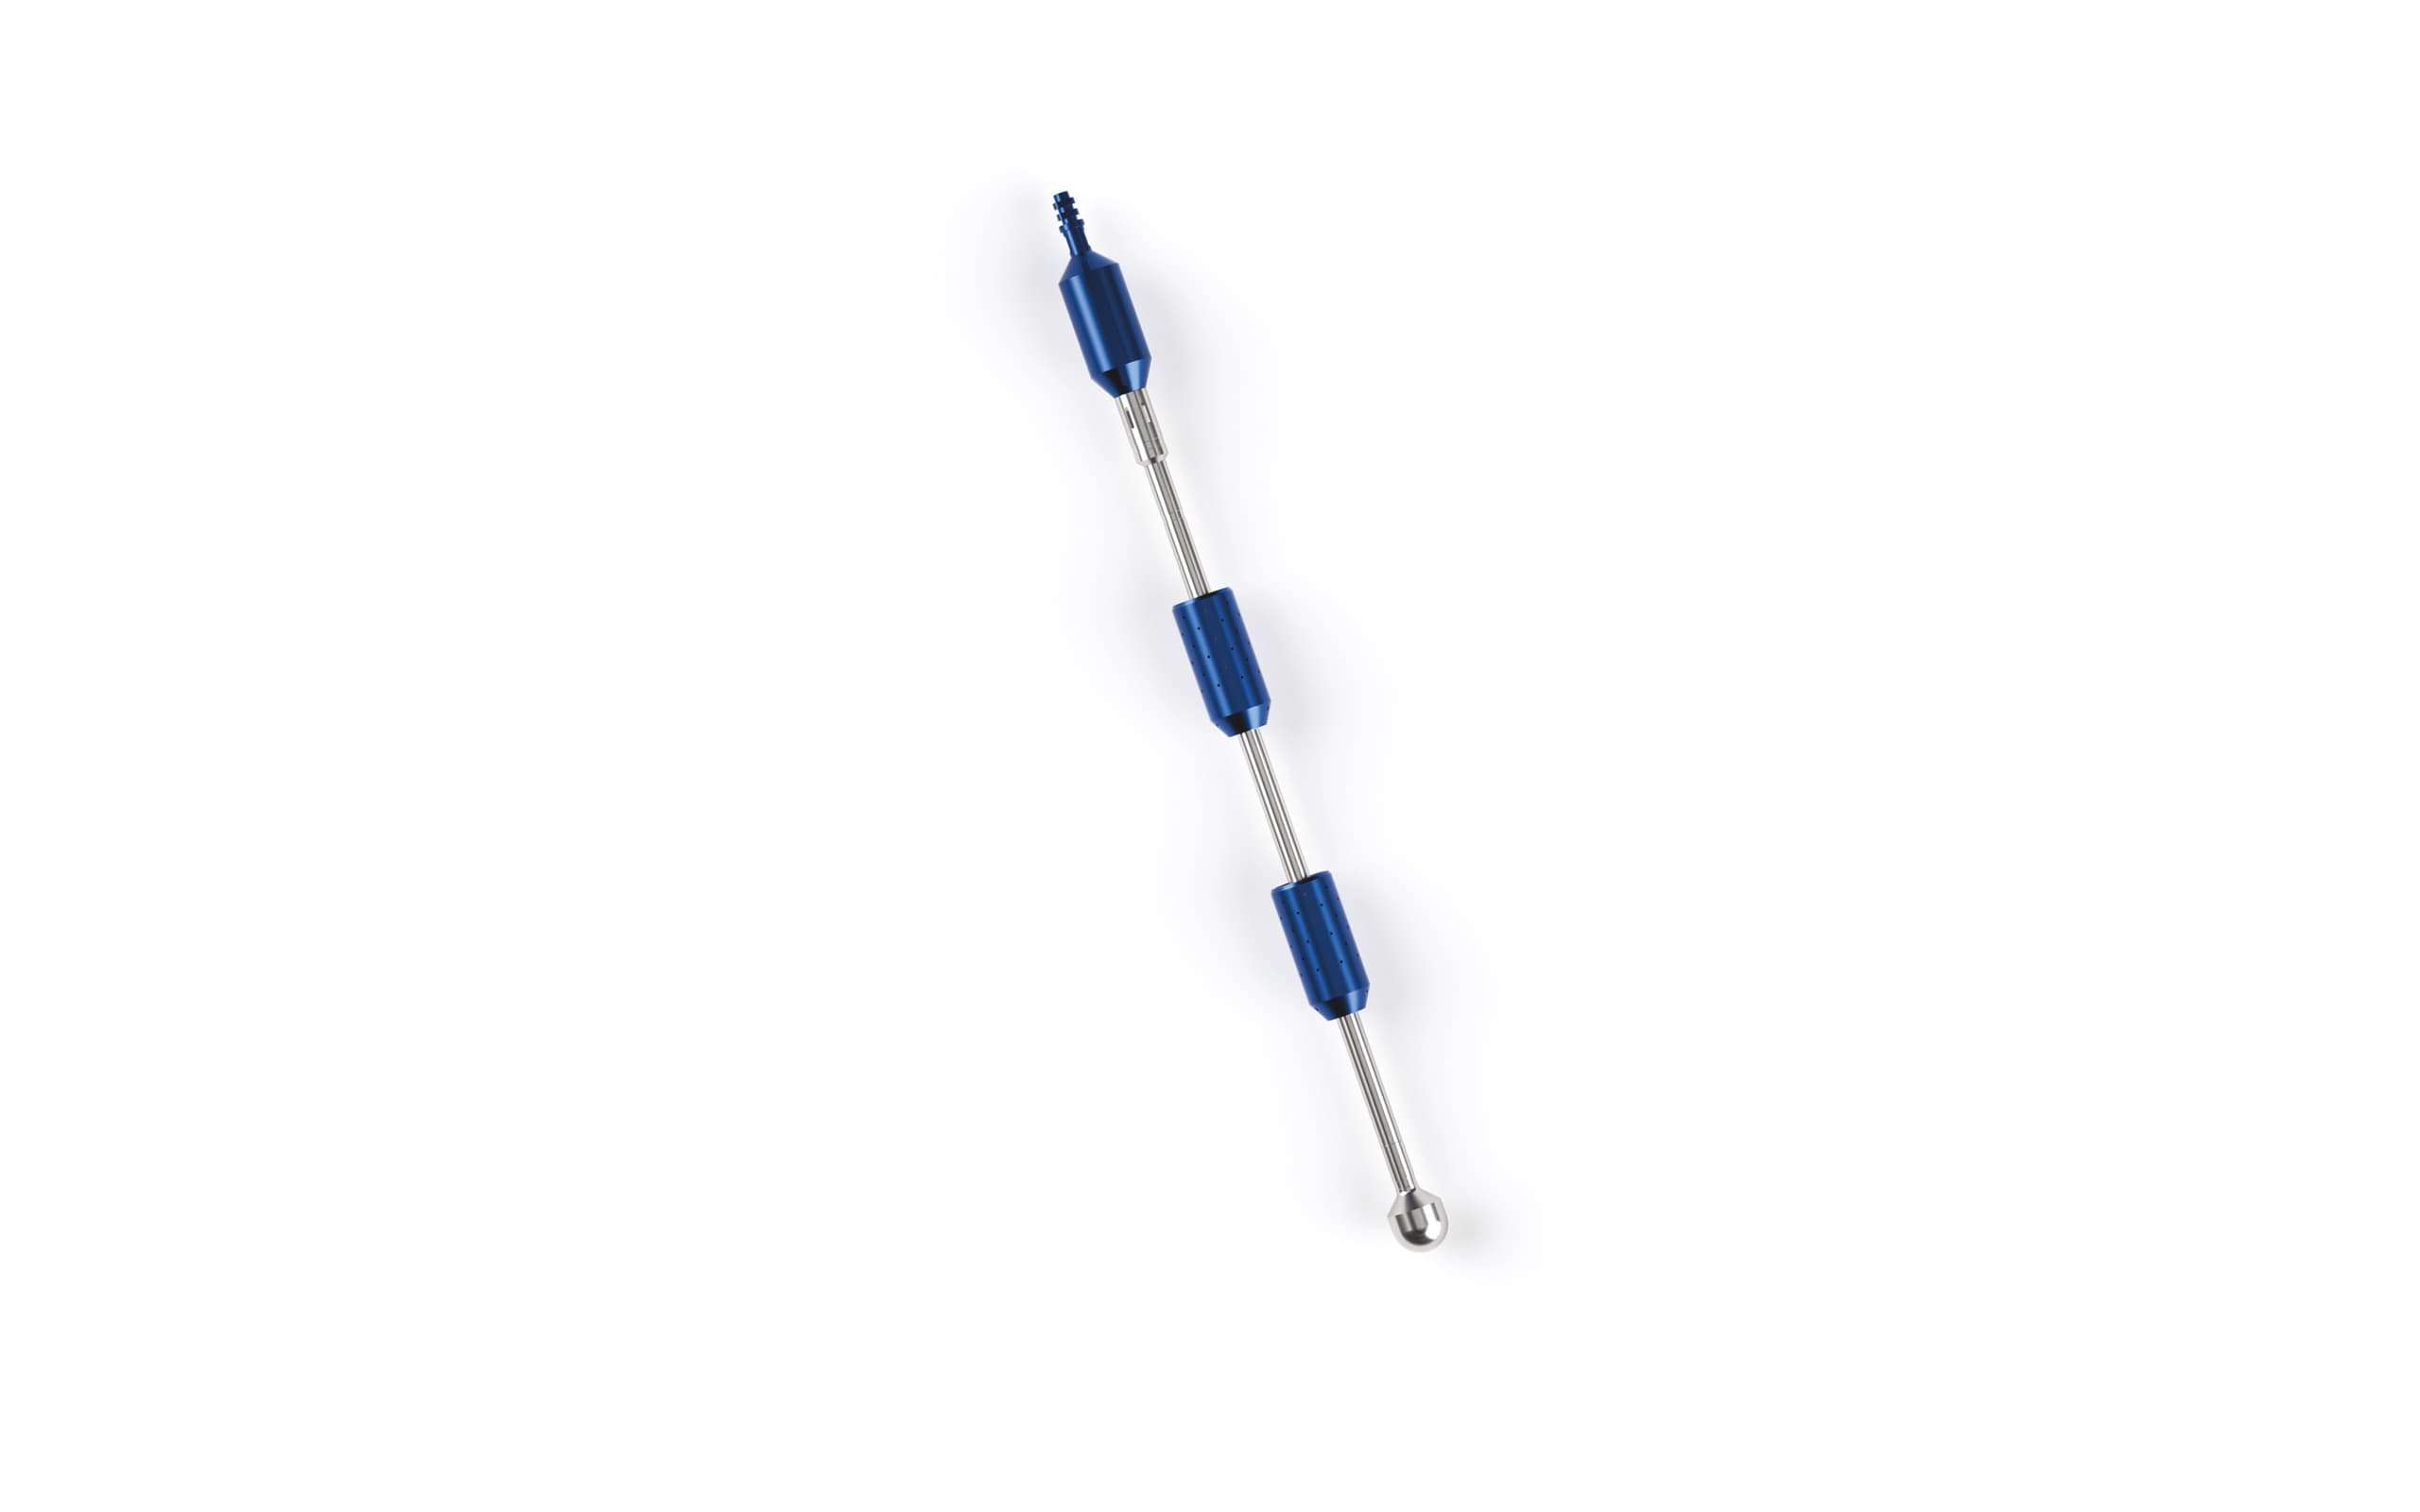 Long metal rod with blue thicker tubes along the rod